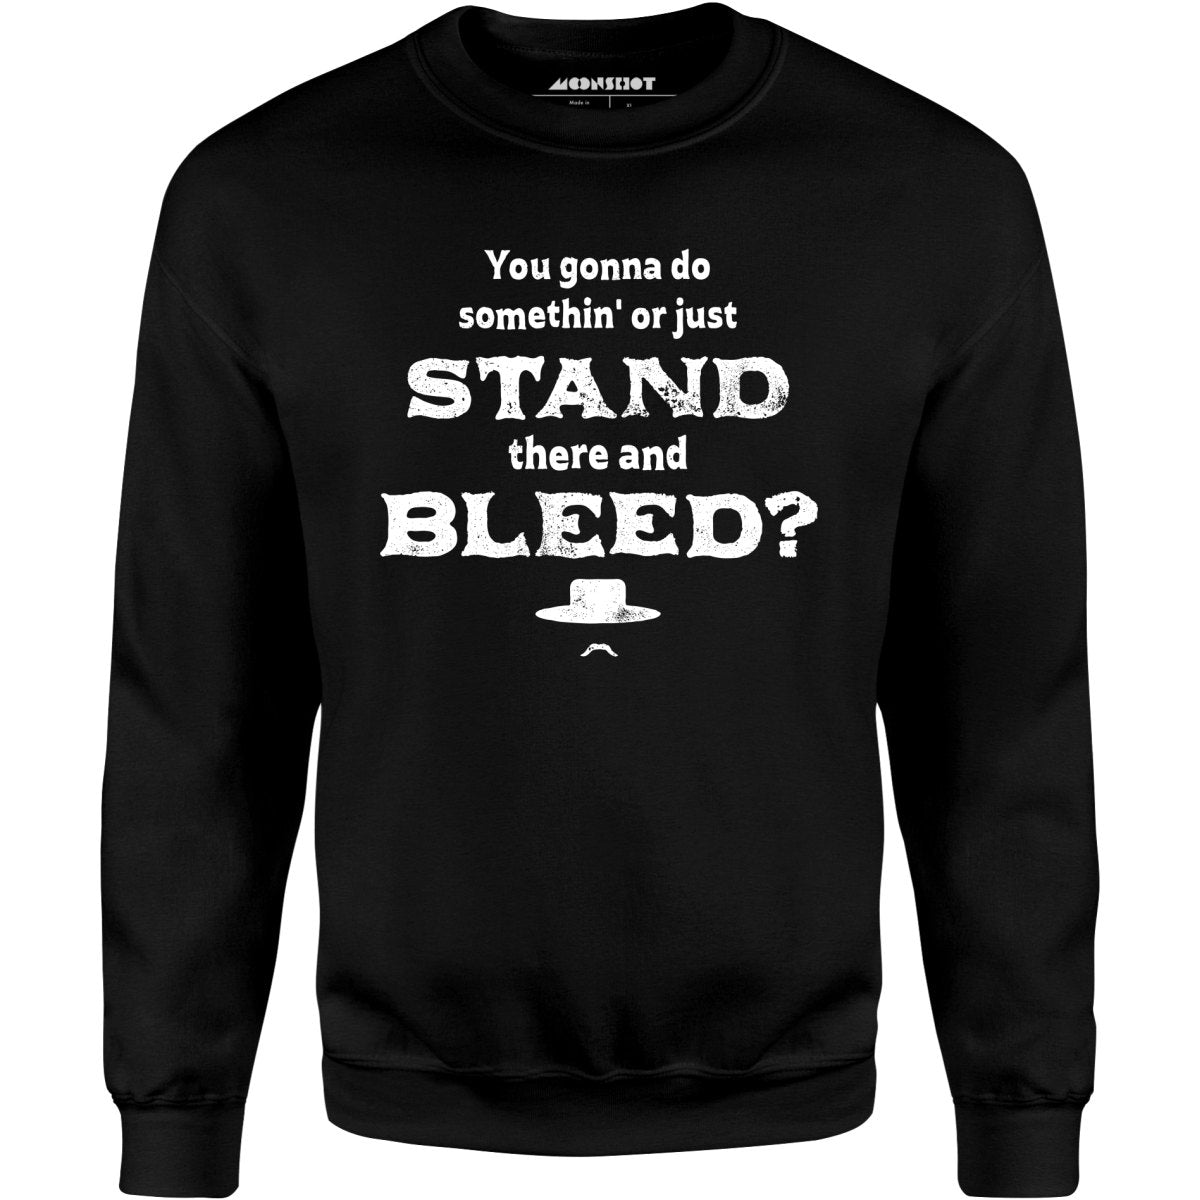 Tombstone Stand There and Bleed - Unisex Sweatshirt